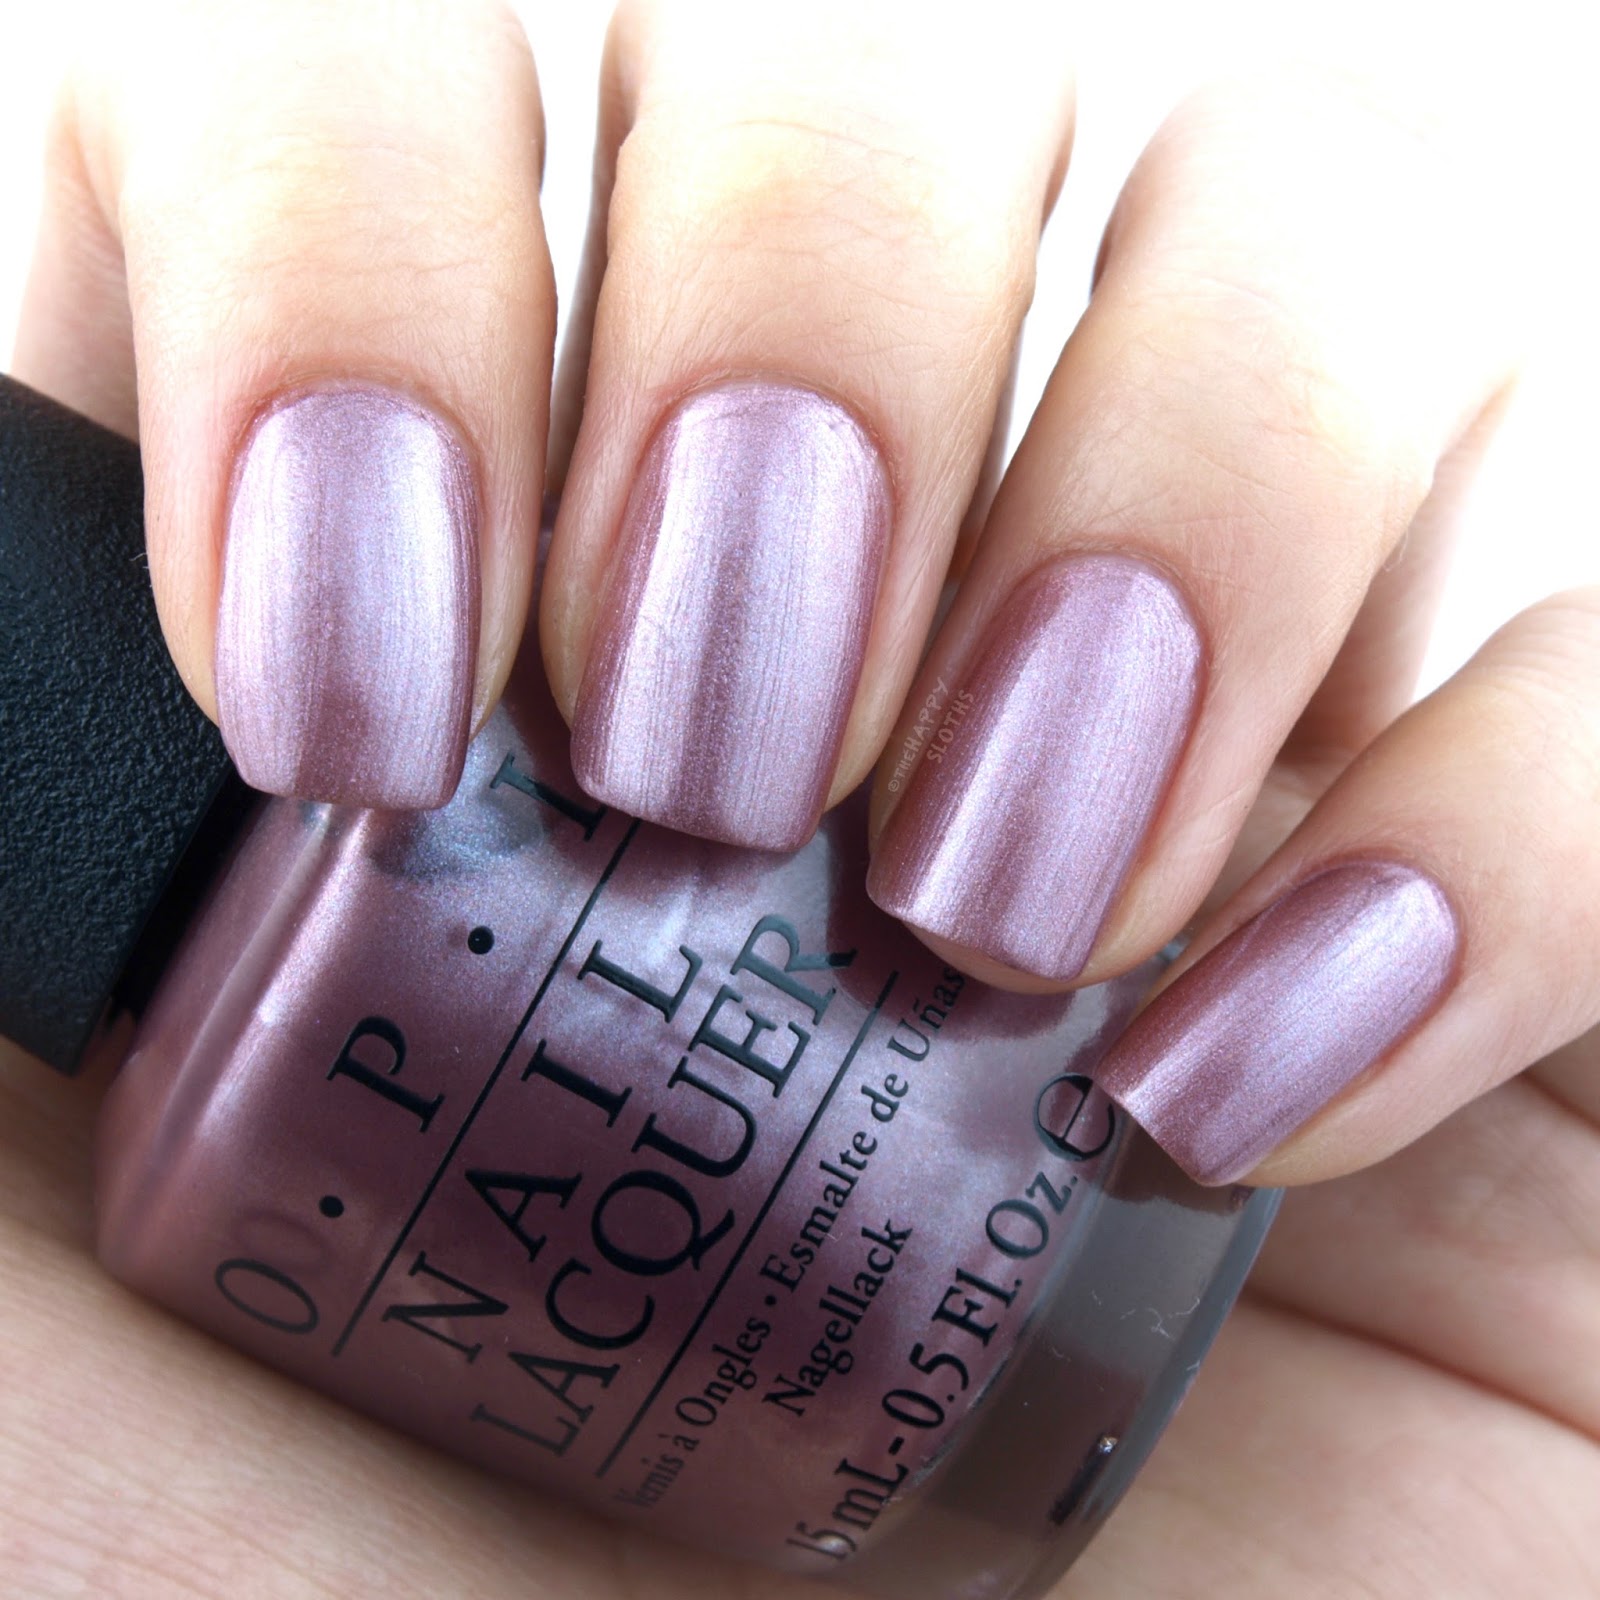 OPI Fall 2017 Iceland Collection | Reykjavik Has All the Hot Spots: Review and Swatches